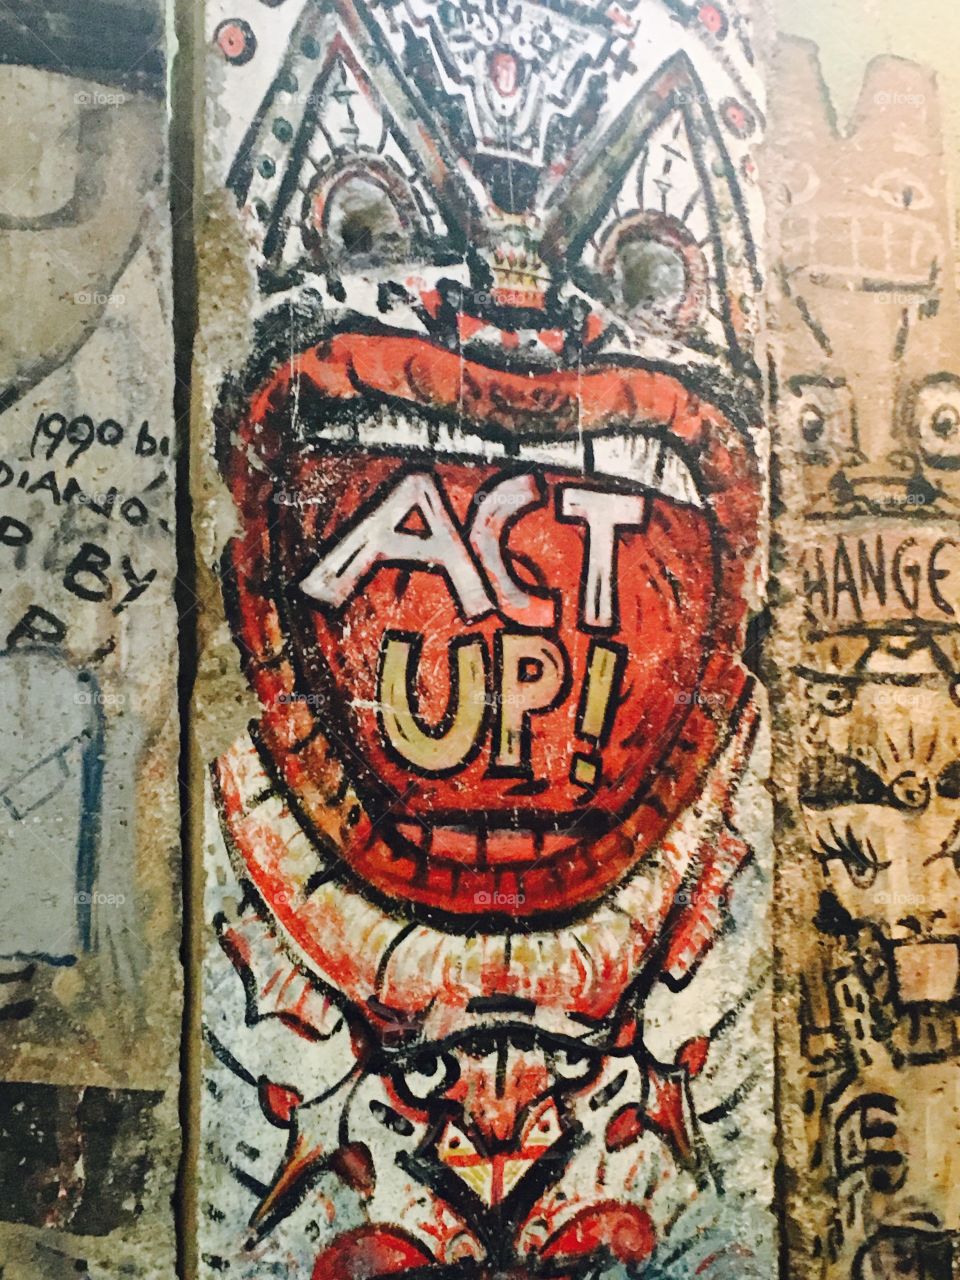 Pieces of the Berlin Wall